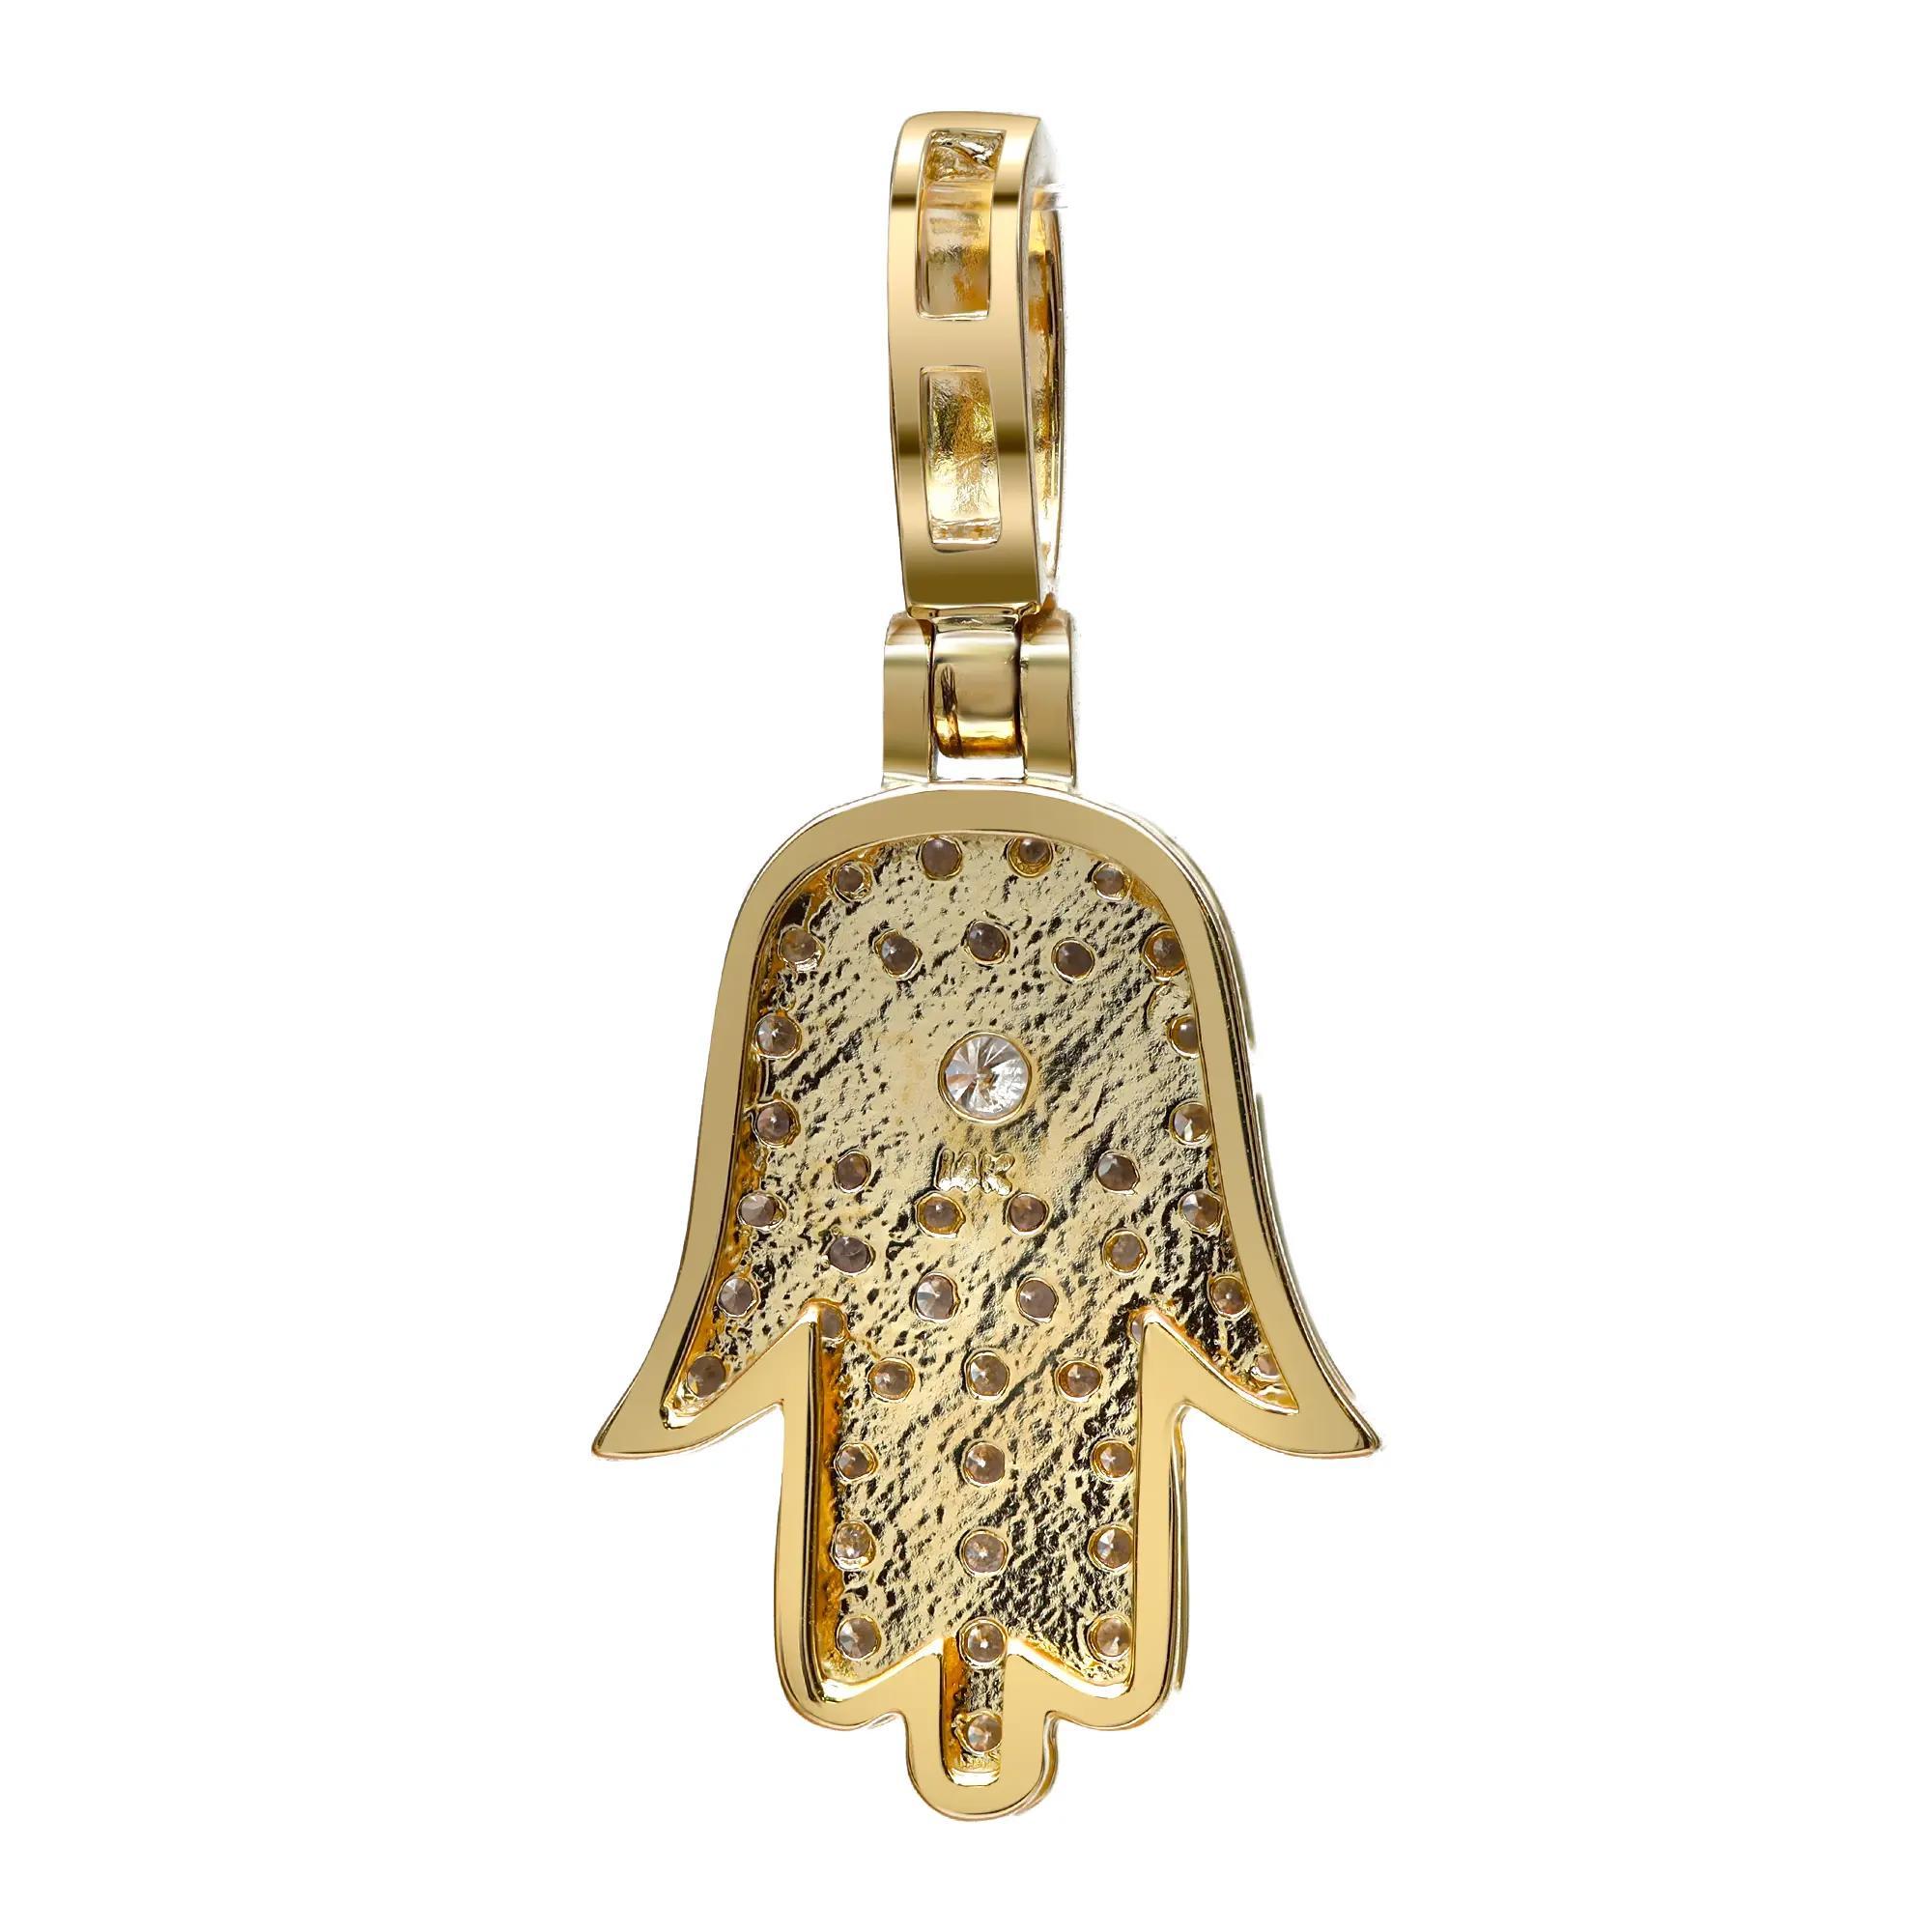 This majestic Hamsa pendant features pave set sparkling round cut diamonds. Total diamond weight: 0.50 carat. The pendant is crafted in 14K yellow gold. Diamond color I and SI clarity. Pendant size: 0.5 inch x 1.1 inches. Total weight: 3.31 grams.